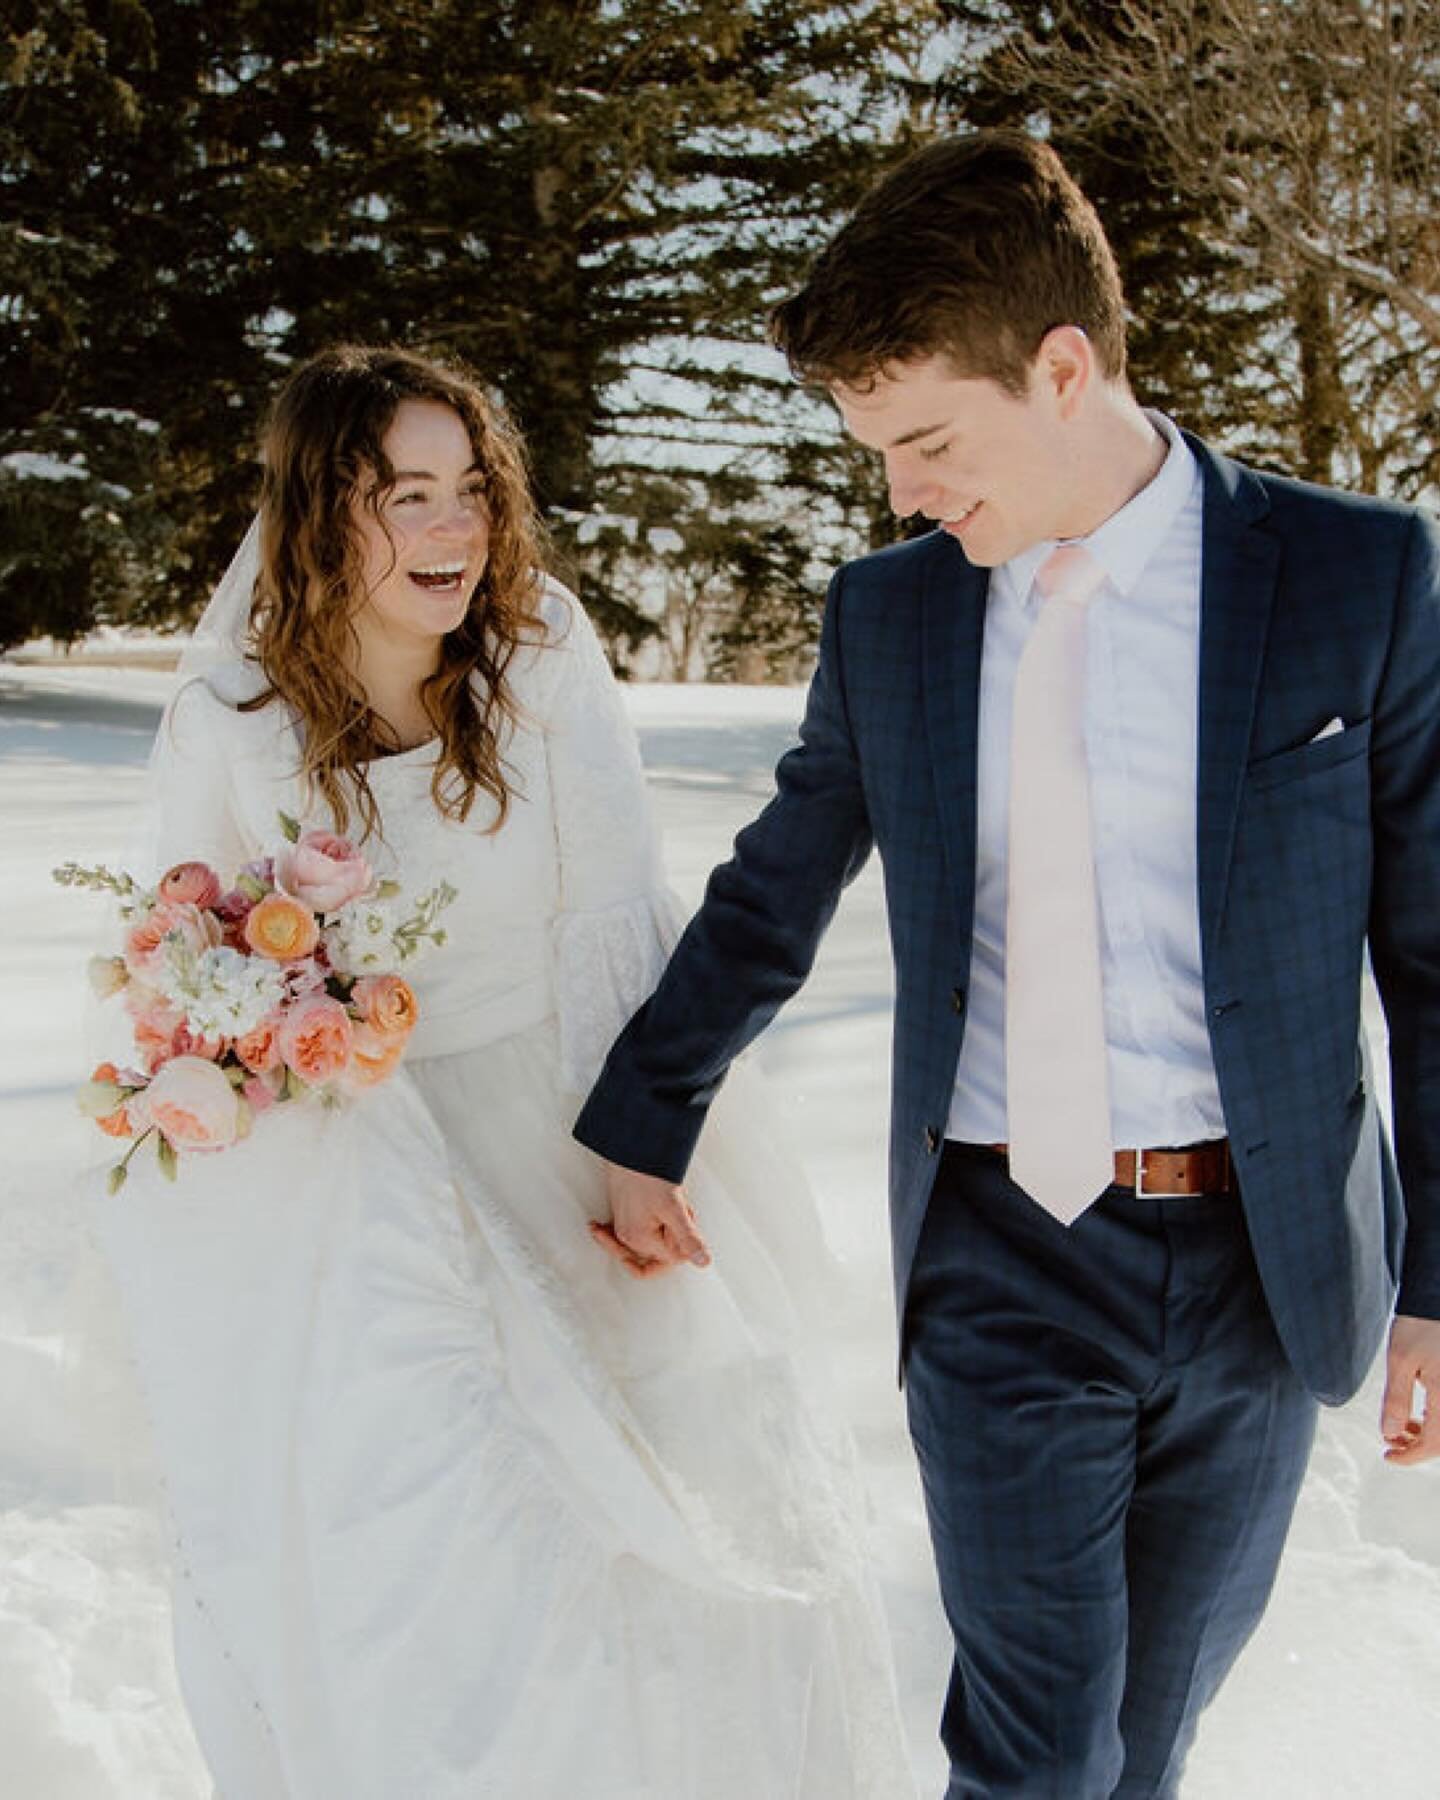 Some of my favourite portraits from the sweetest winter wedding earlier this year. Joseph &amp; Anna were married at the Cardston Temple surrounded by their immediate family. Their immense joy and gentle love for each other were so incredibly evident